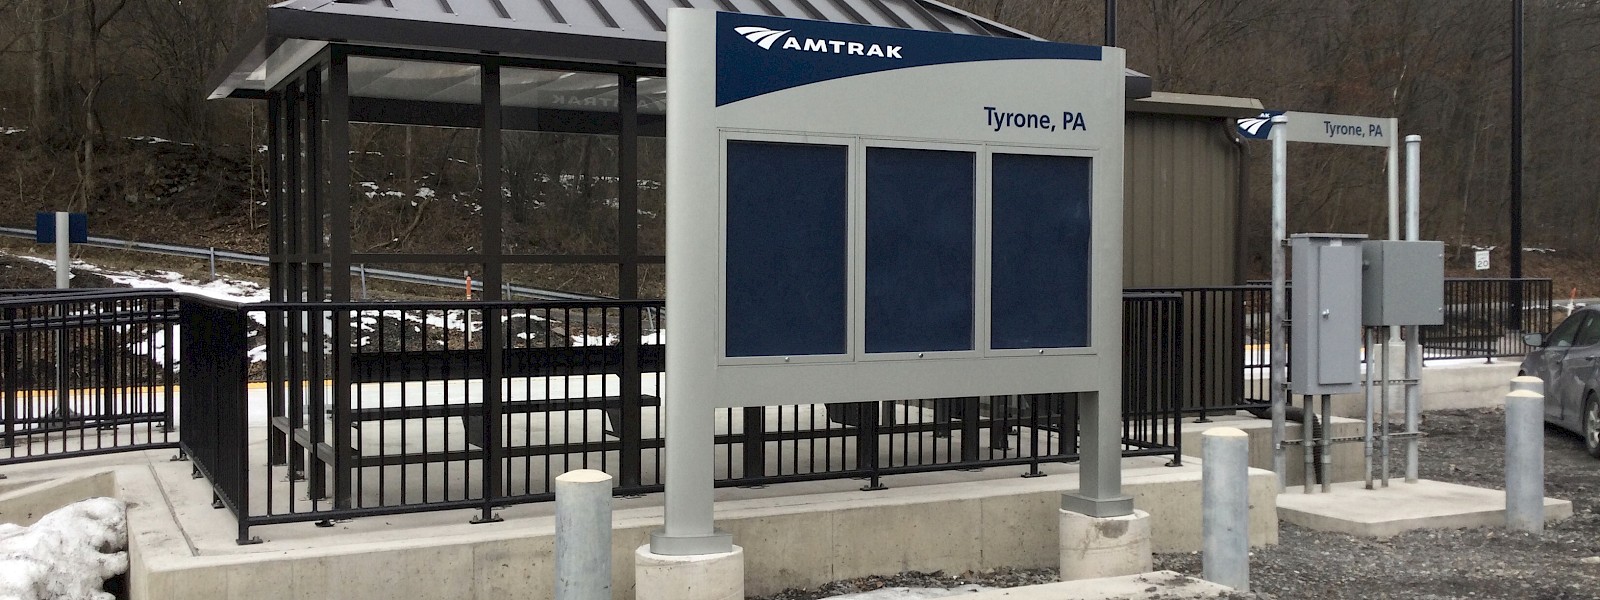 Tyrone PA Amtrak Station Photo by Dave Curtis